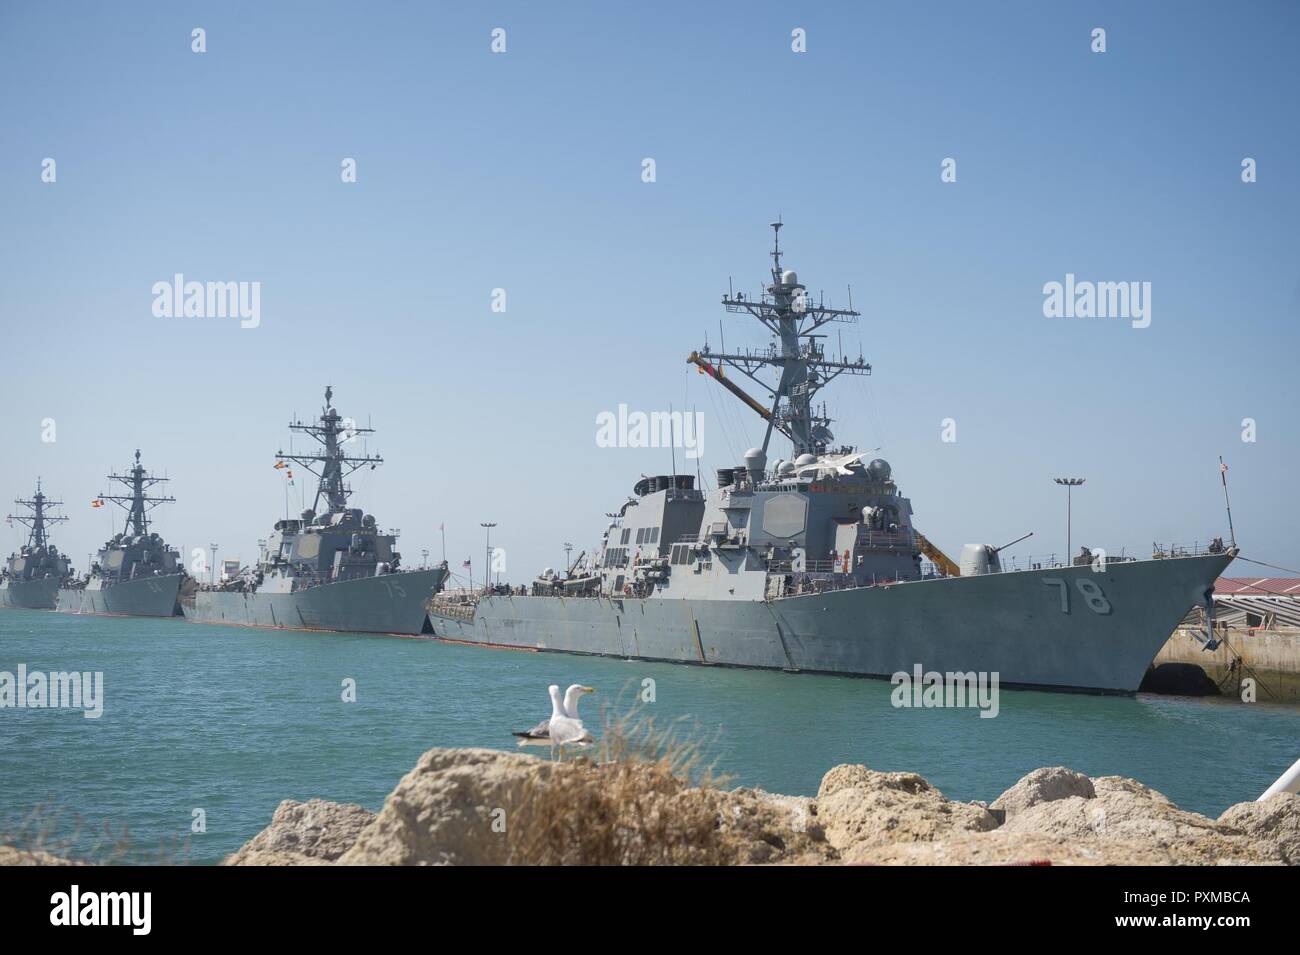 NAVAL STATION ROTA, Spain (June 13, 2017) The Arleigh Burke-class guided-missile destroyers USS Porter (DDG 78), front, USS Donald Cook (DDG 75), USS Carney (DDG 64), and USS Ross (DDG 71) moored at Naval Station Rota, Spain, June 13, 2017. Ross, forward-deployed to Rota, is conducting naval operations in the U.S. 6th Fleet area of operations in support of U.S. national security interests in Europe and Africa. Stock Photo